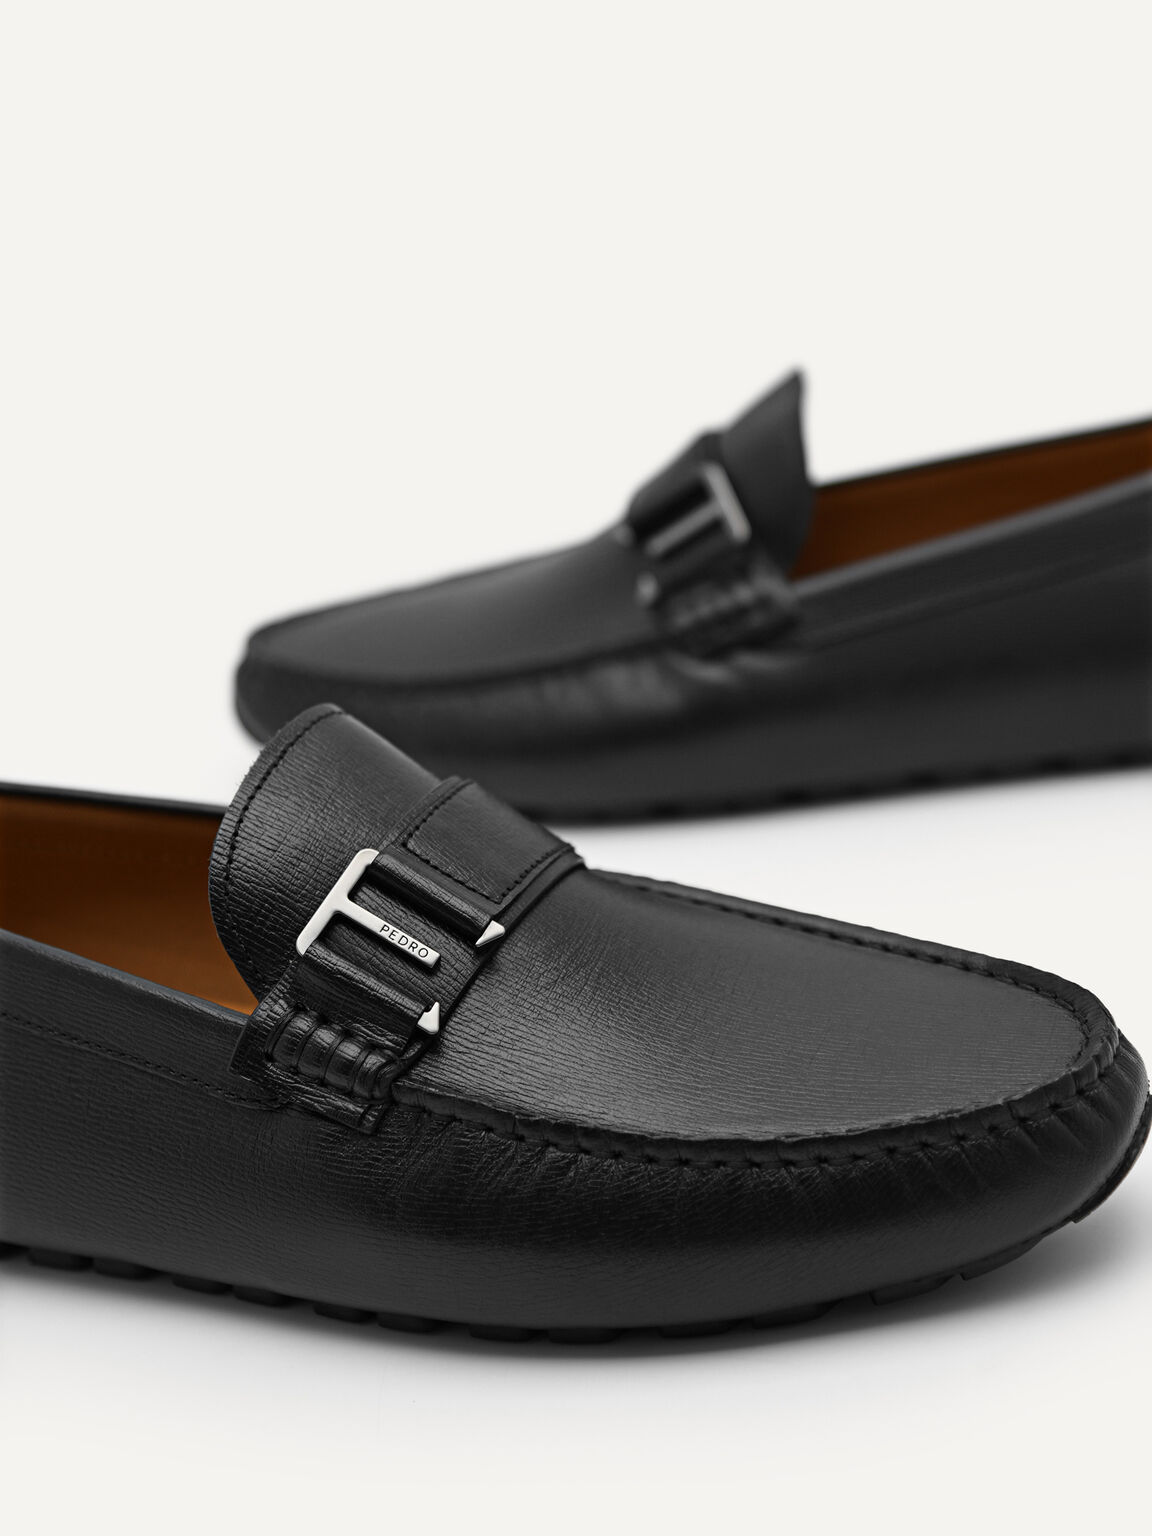 Leather Driving Moccassins, Black